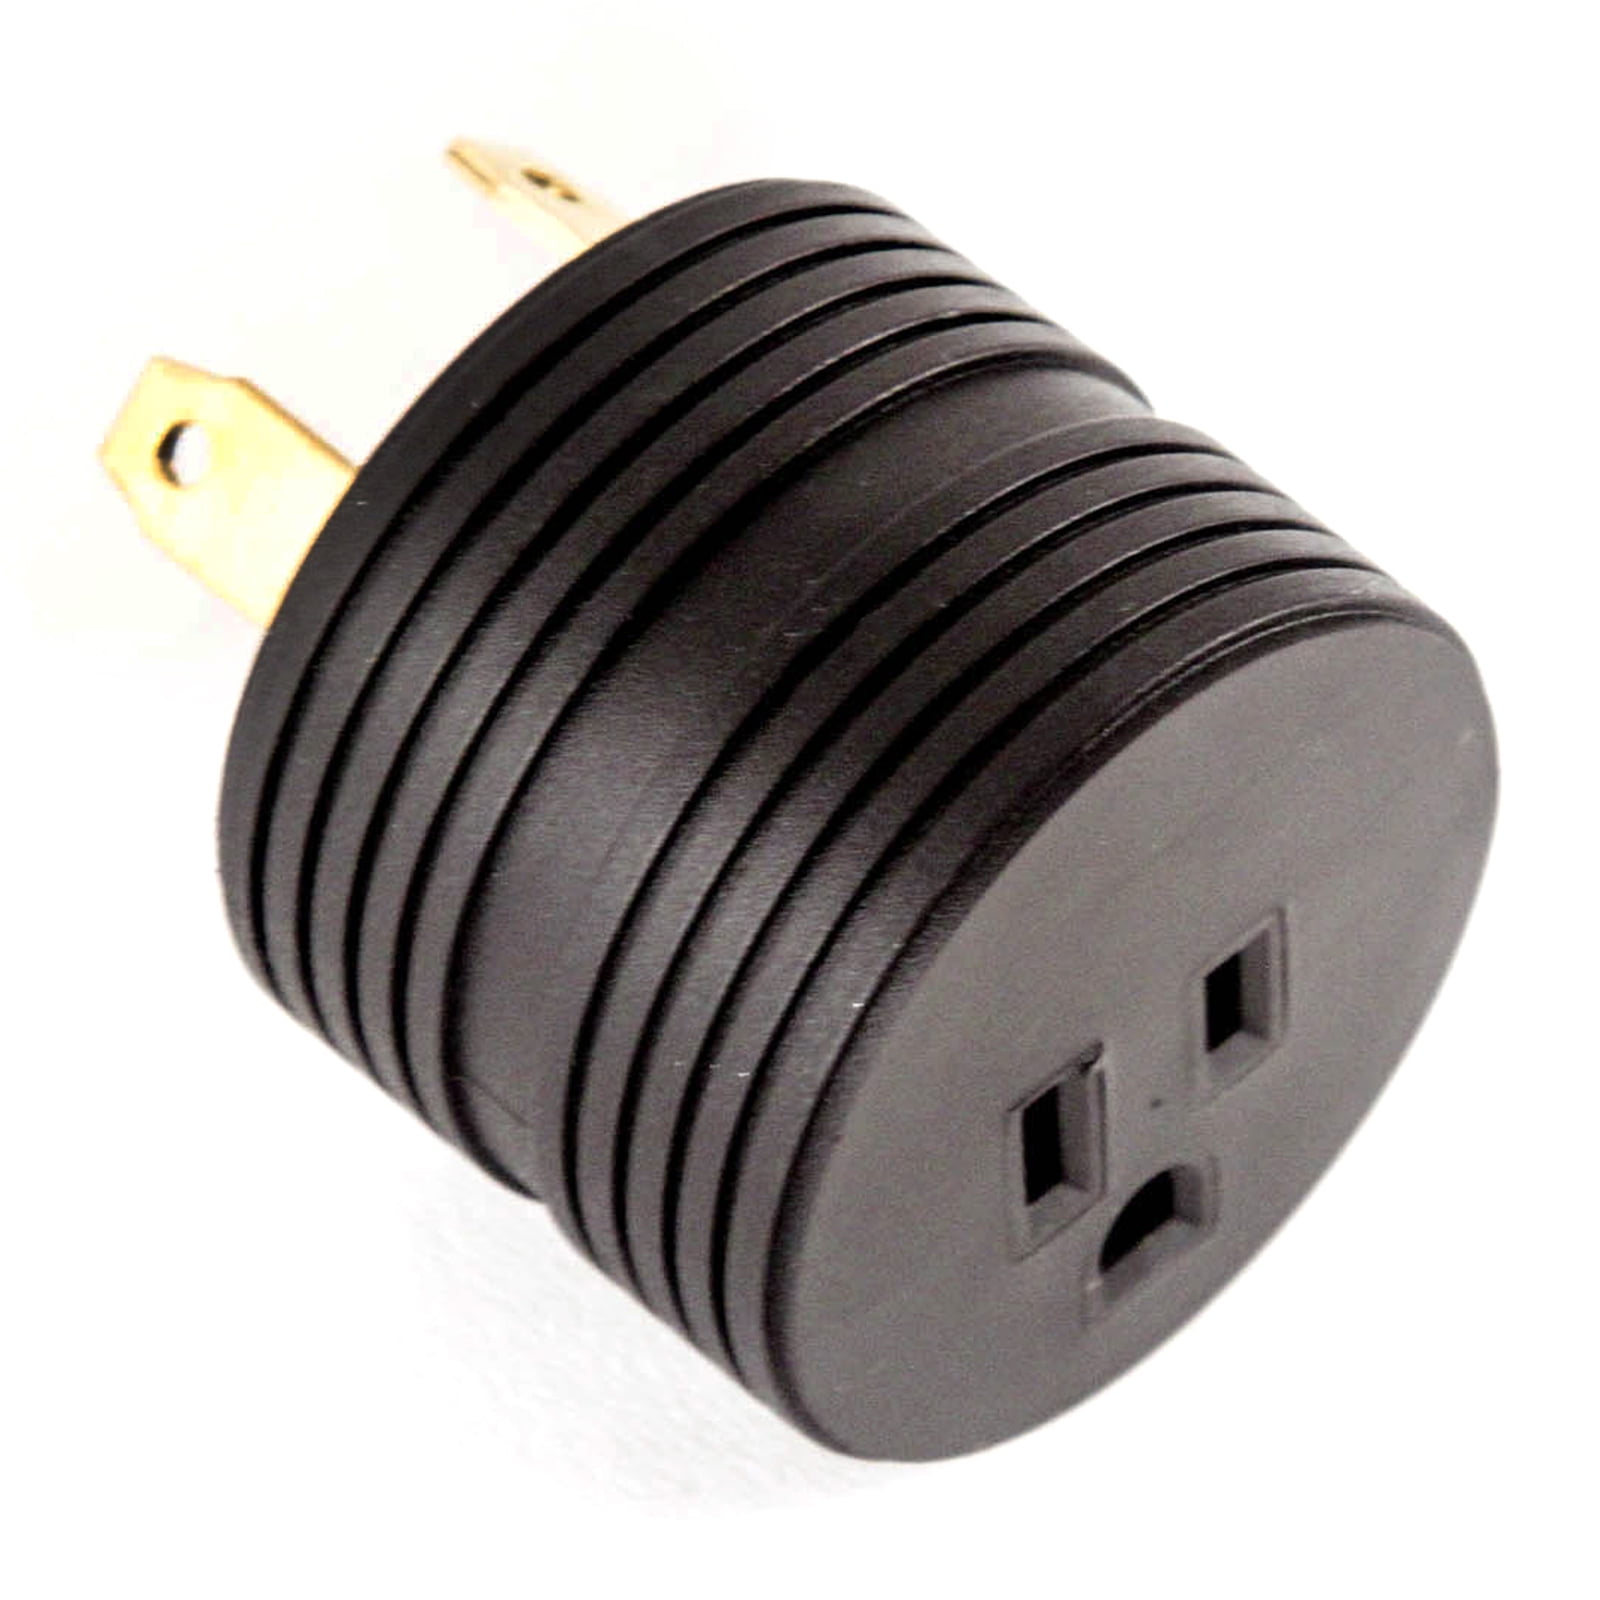 30 amp to 110 adapter